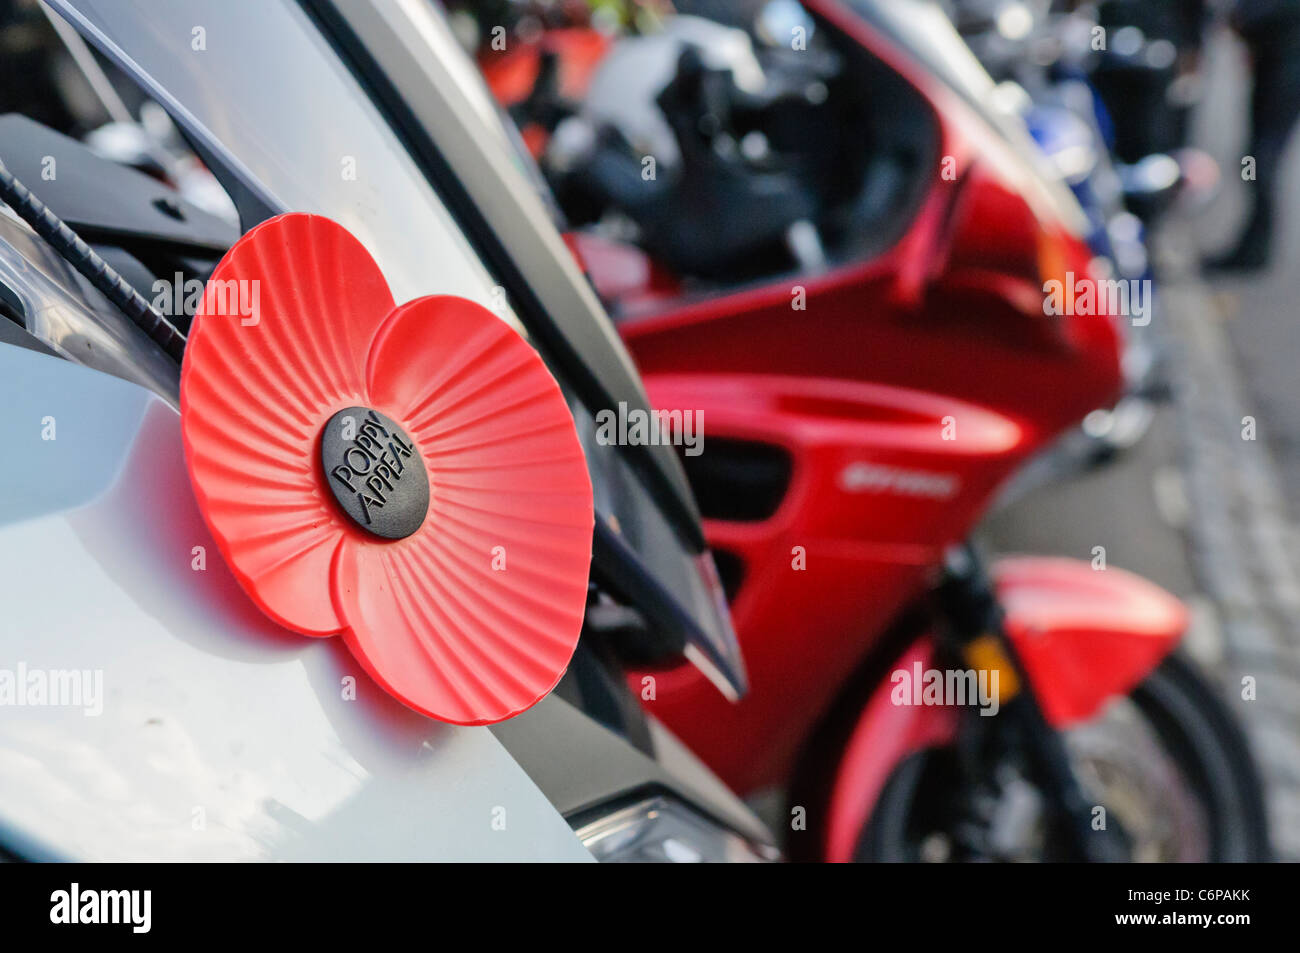 Large British Legion poppy on the front of a motorcycle Stock Photo